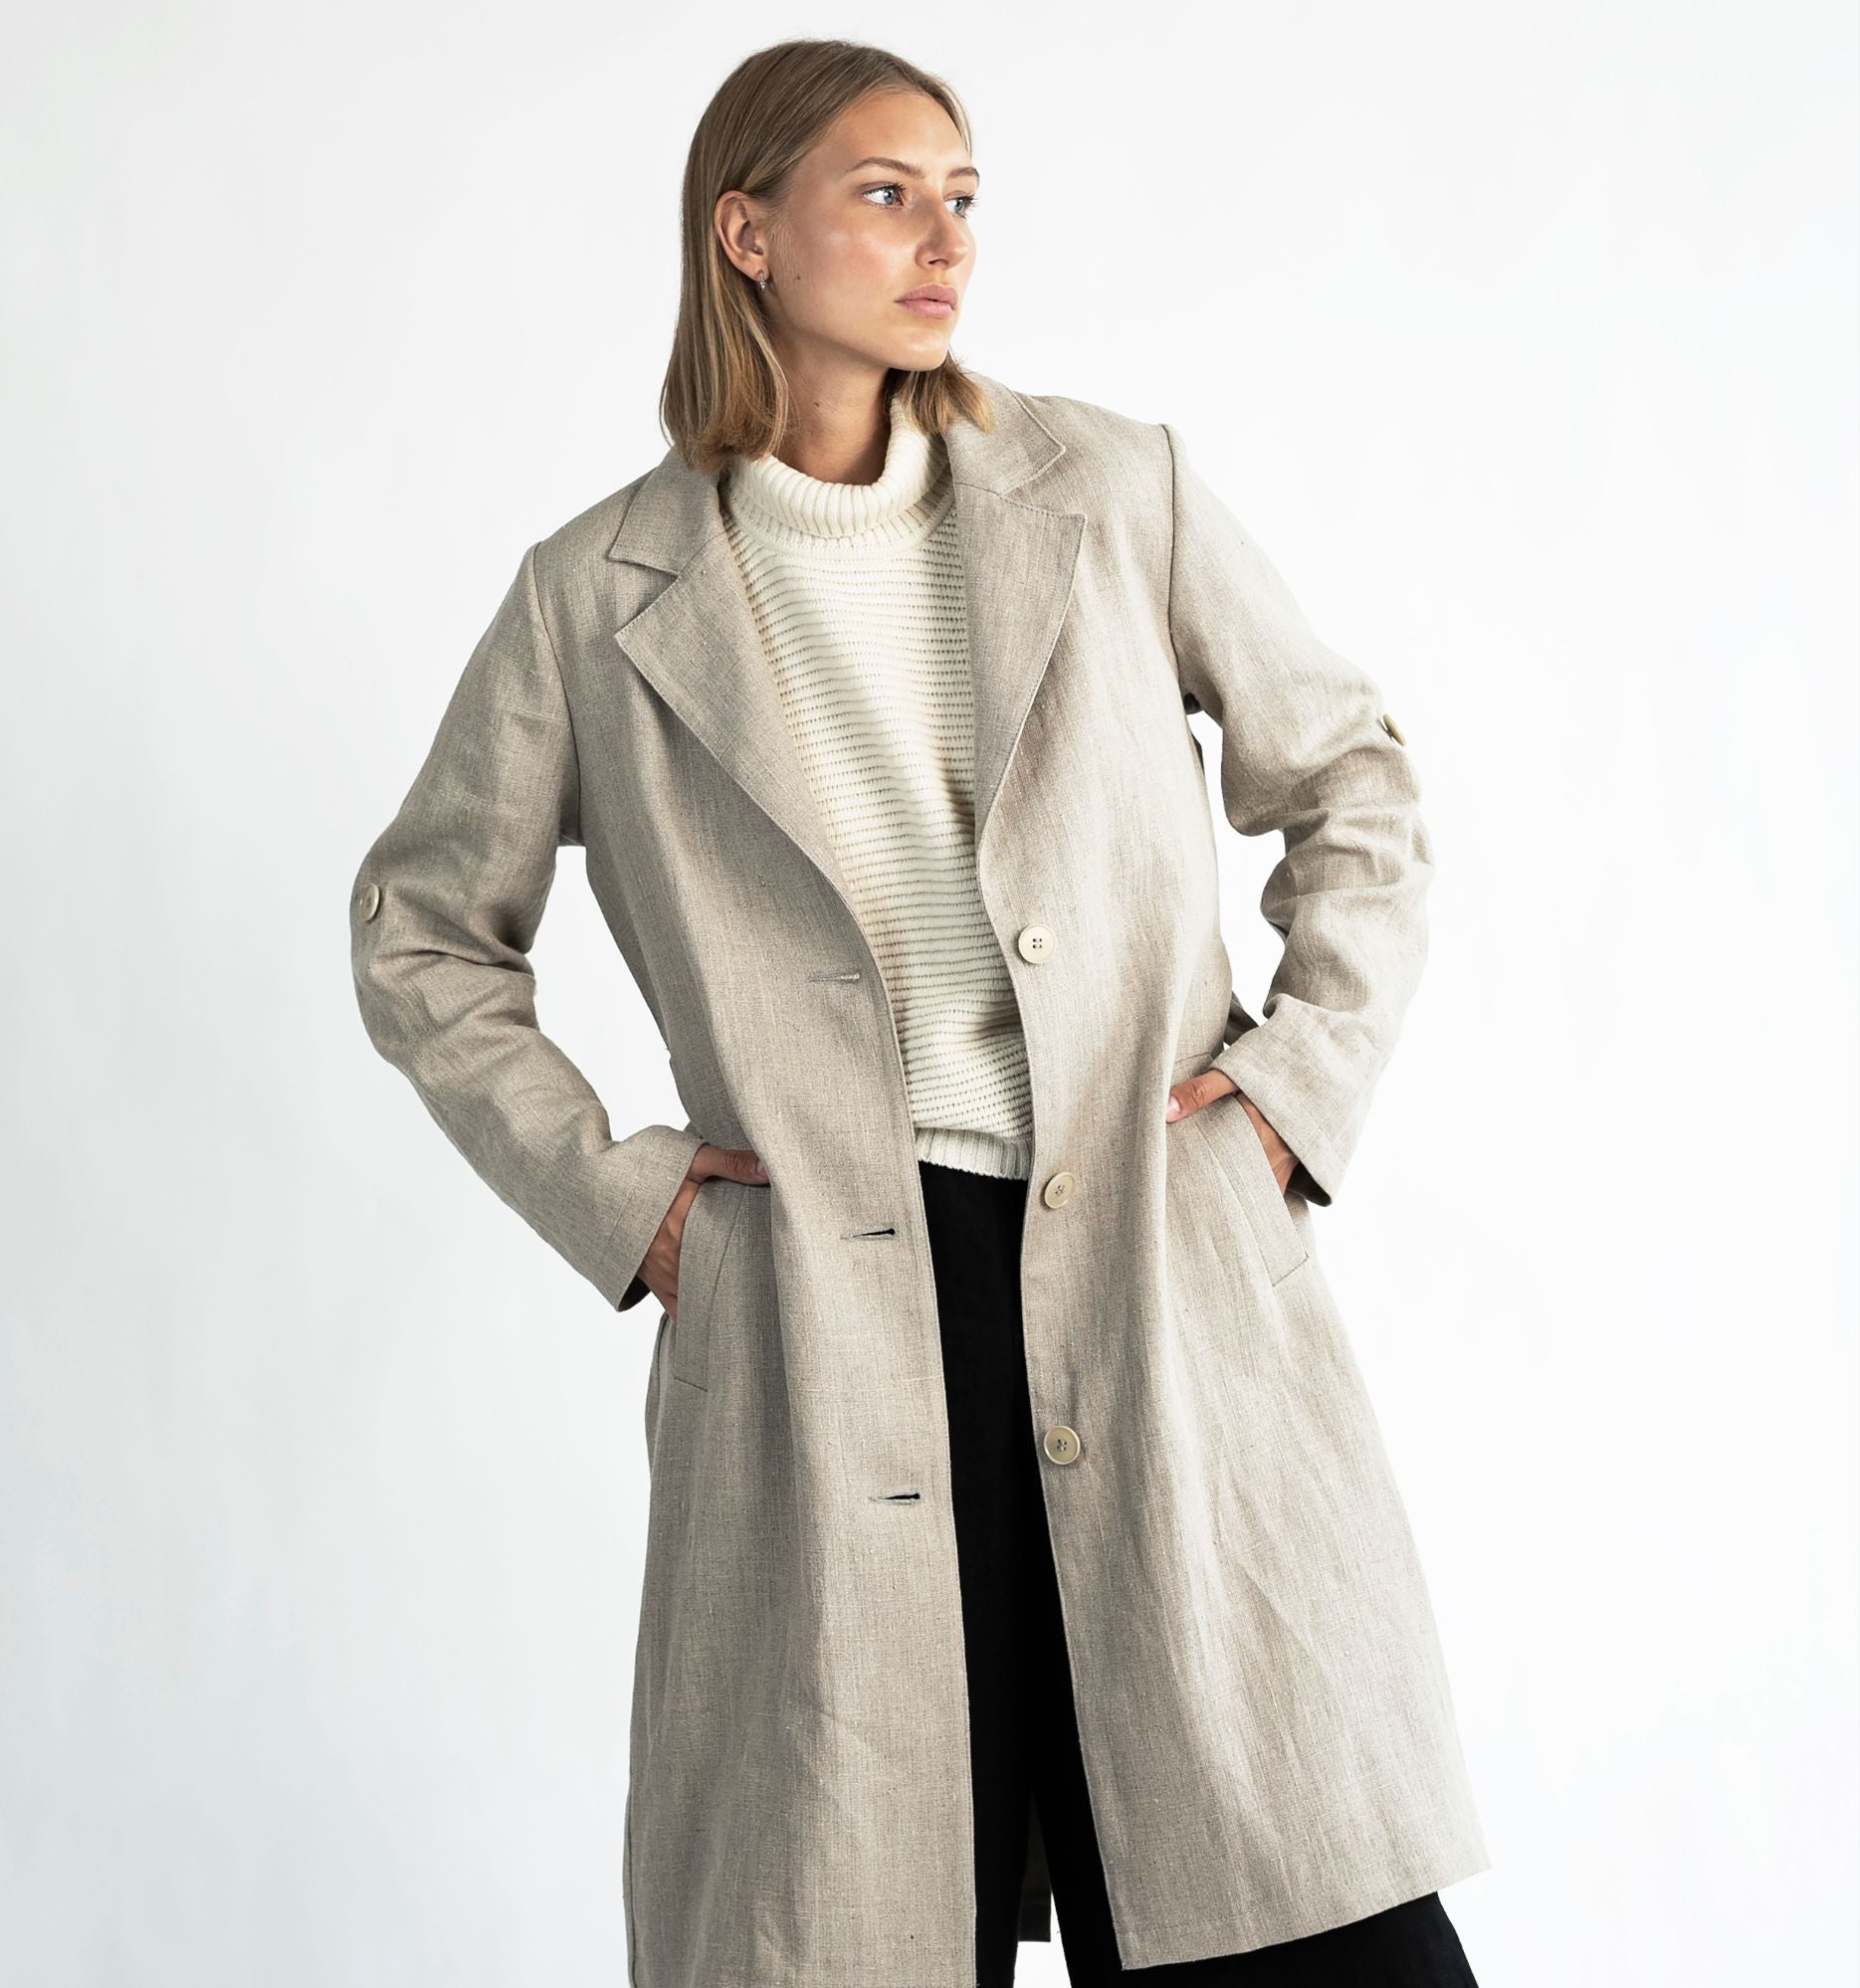 Bonnie lang Trenchcoat - A New Story